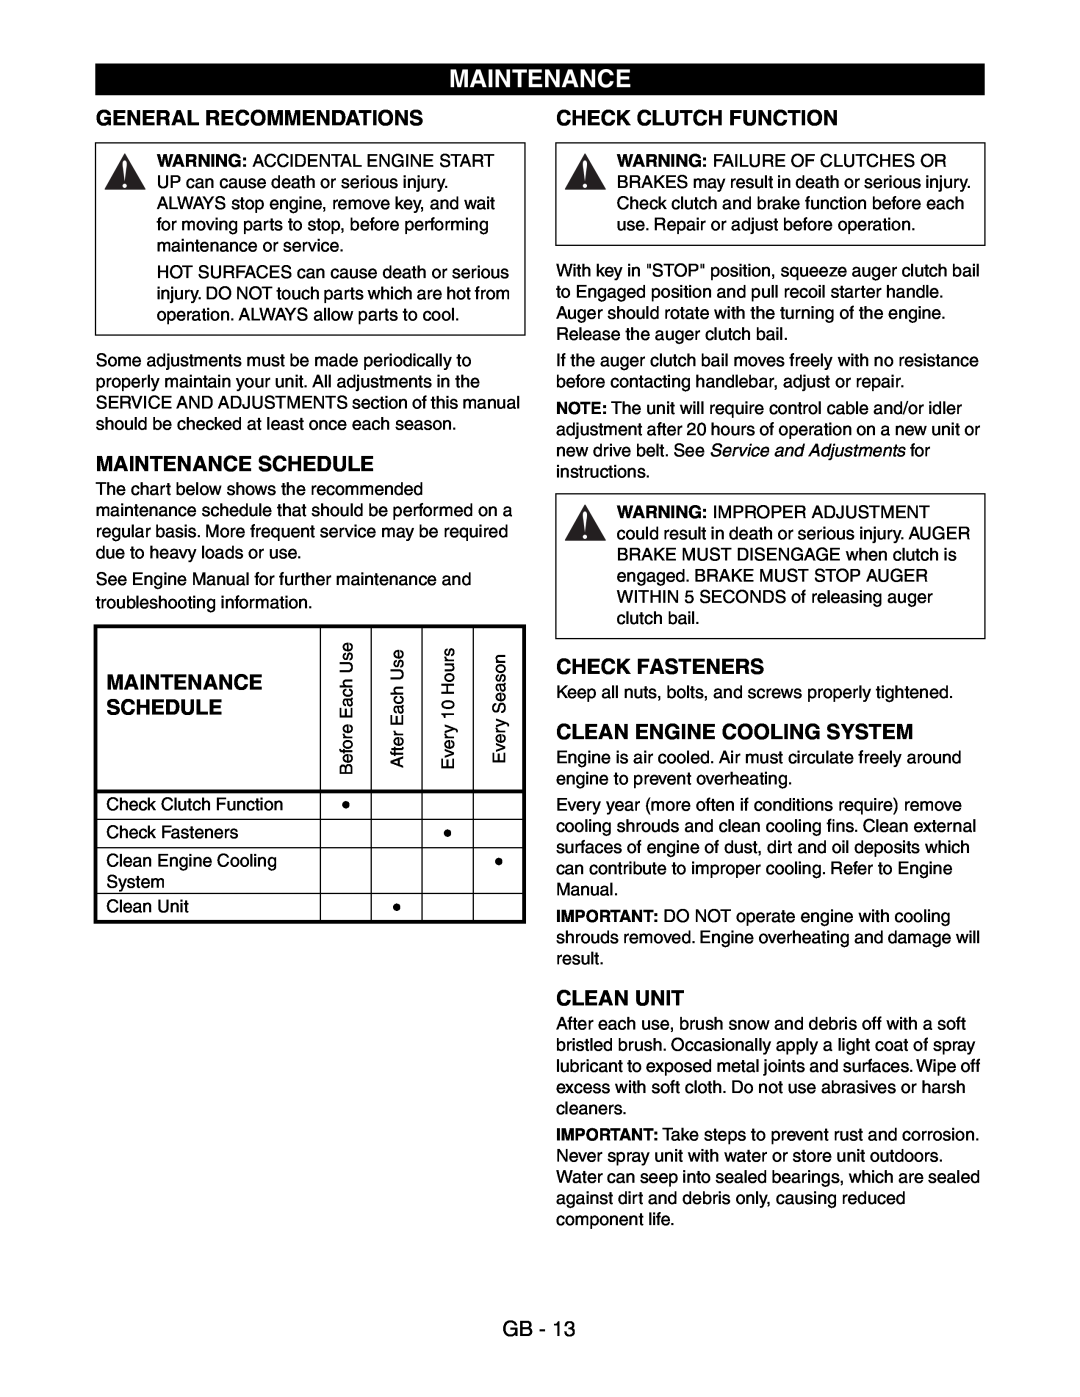 Ariens 938016 - 522 manual General Recommendations, Maintenance Schedule, Check Fasteners, Clean Engine Cooling System 